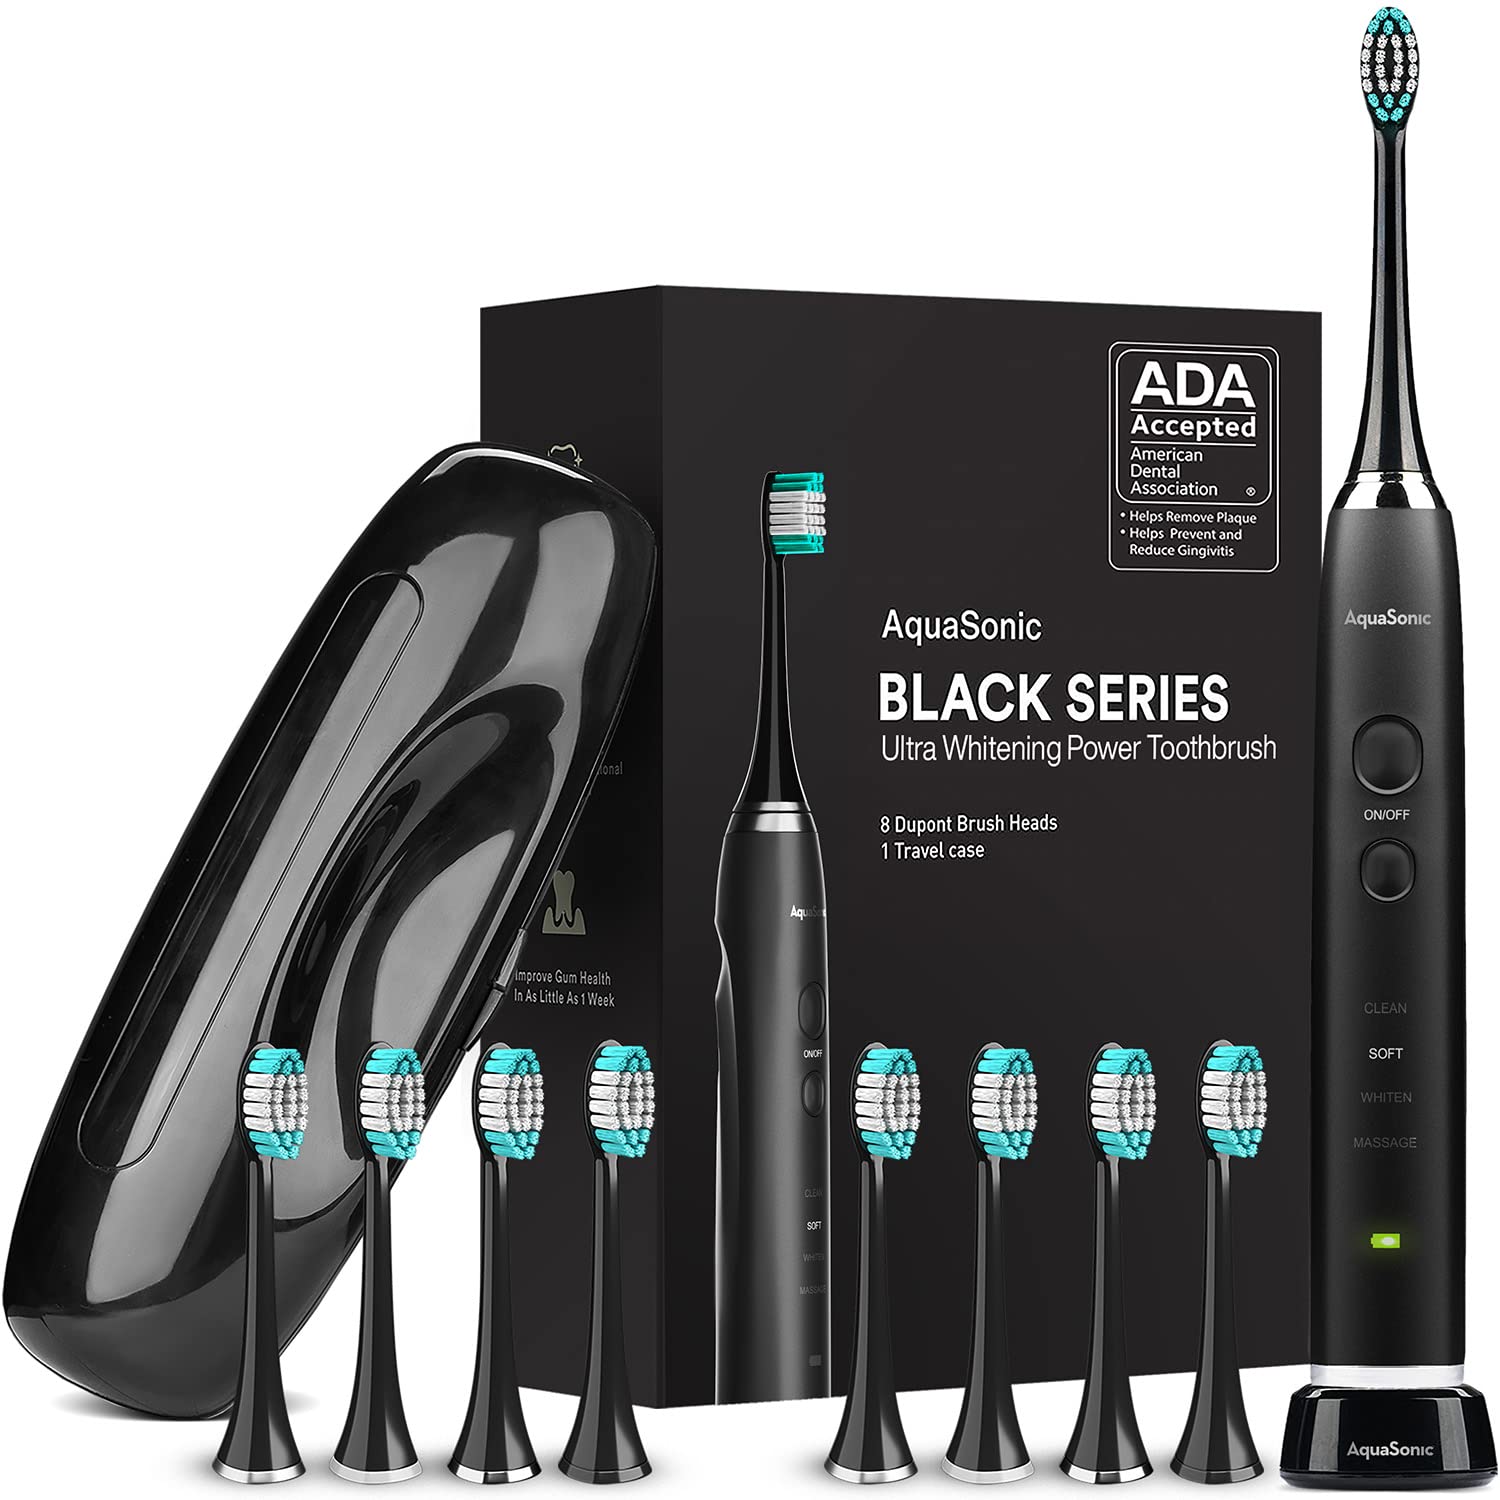 Book Cover Aquasonic Black Series Ultra Whitening Toothbrush – ADA Accepted Power Toothbrush - 8 Brush Heads & Travel Case – 40,000 VPM Electric Motor & Wireless Charging - 4 Modes w Smart Timer